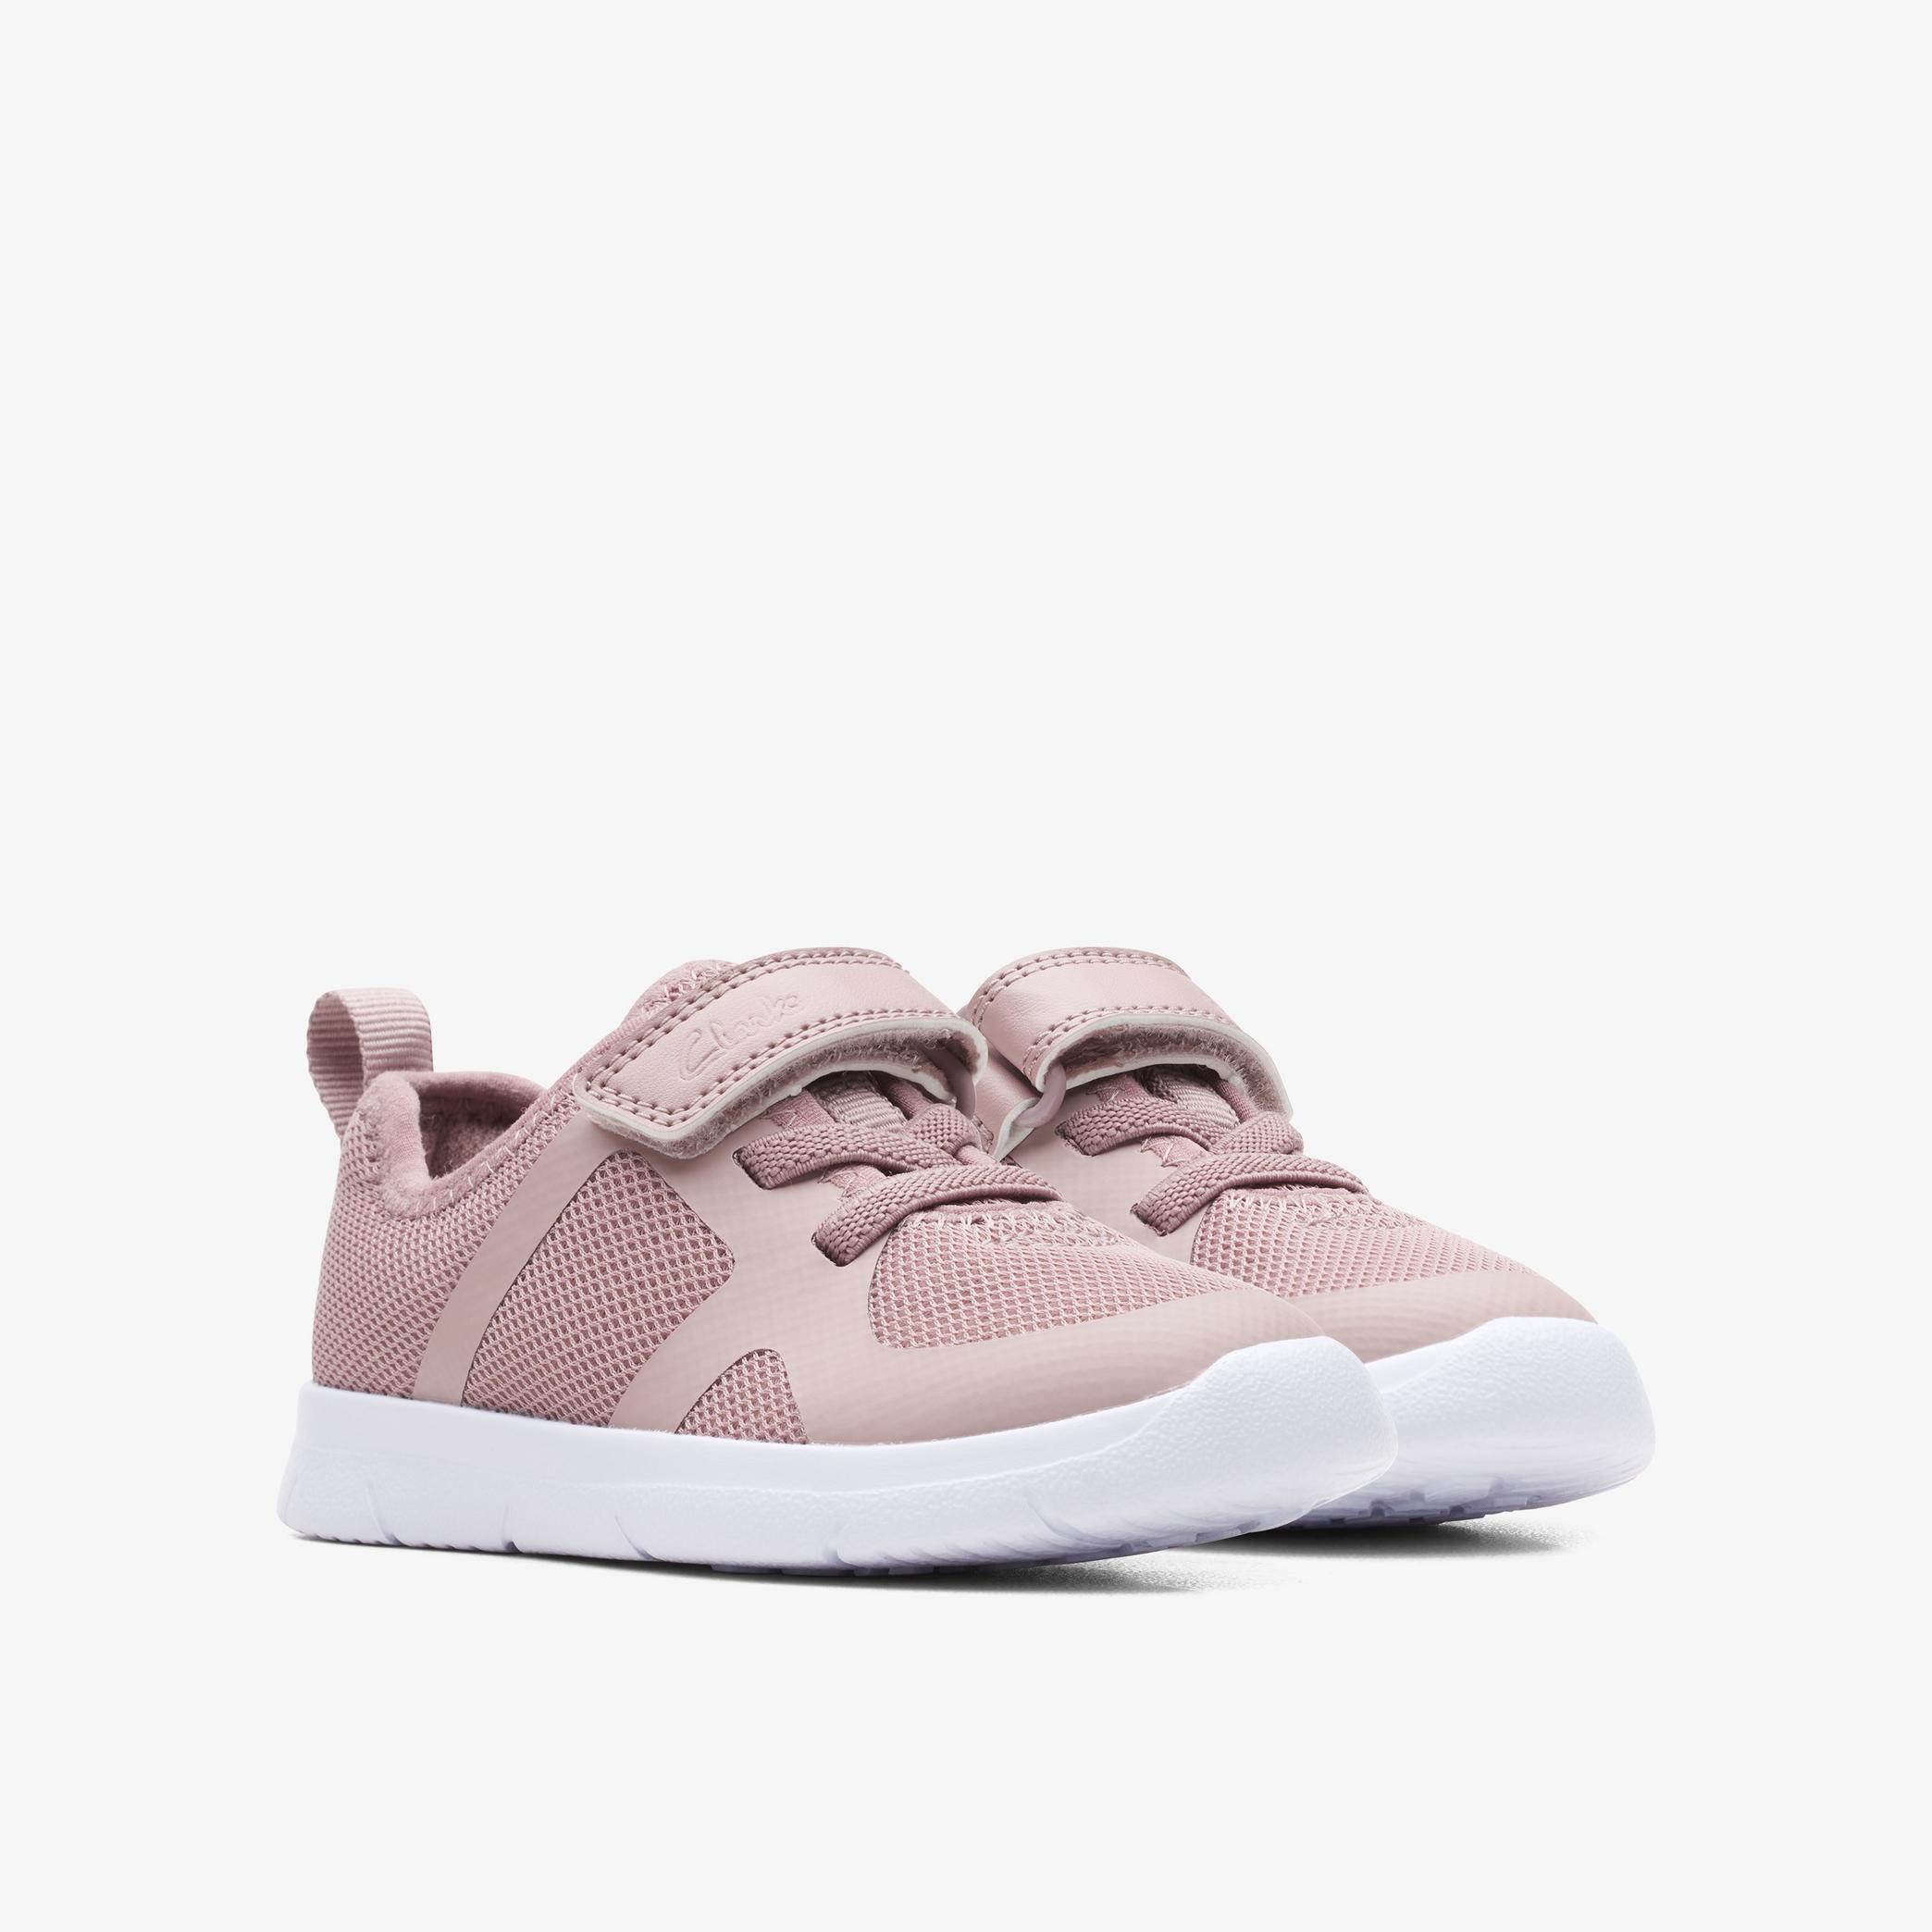 Girls Ath Flux Toddler Pink Trainers | Clarks UK